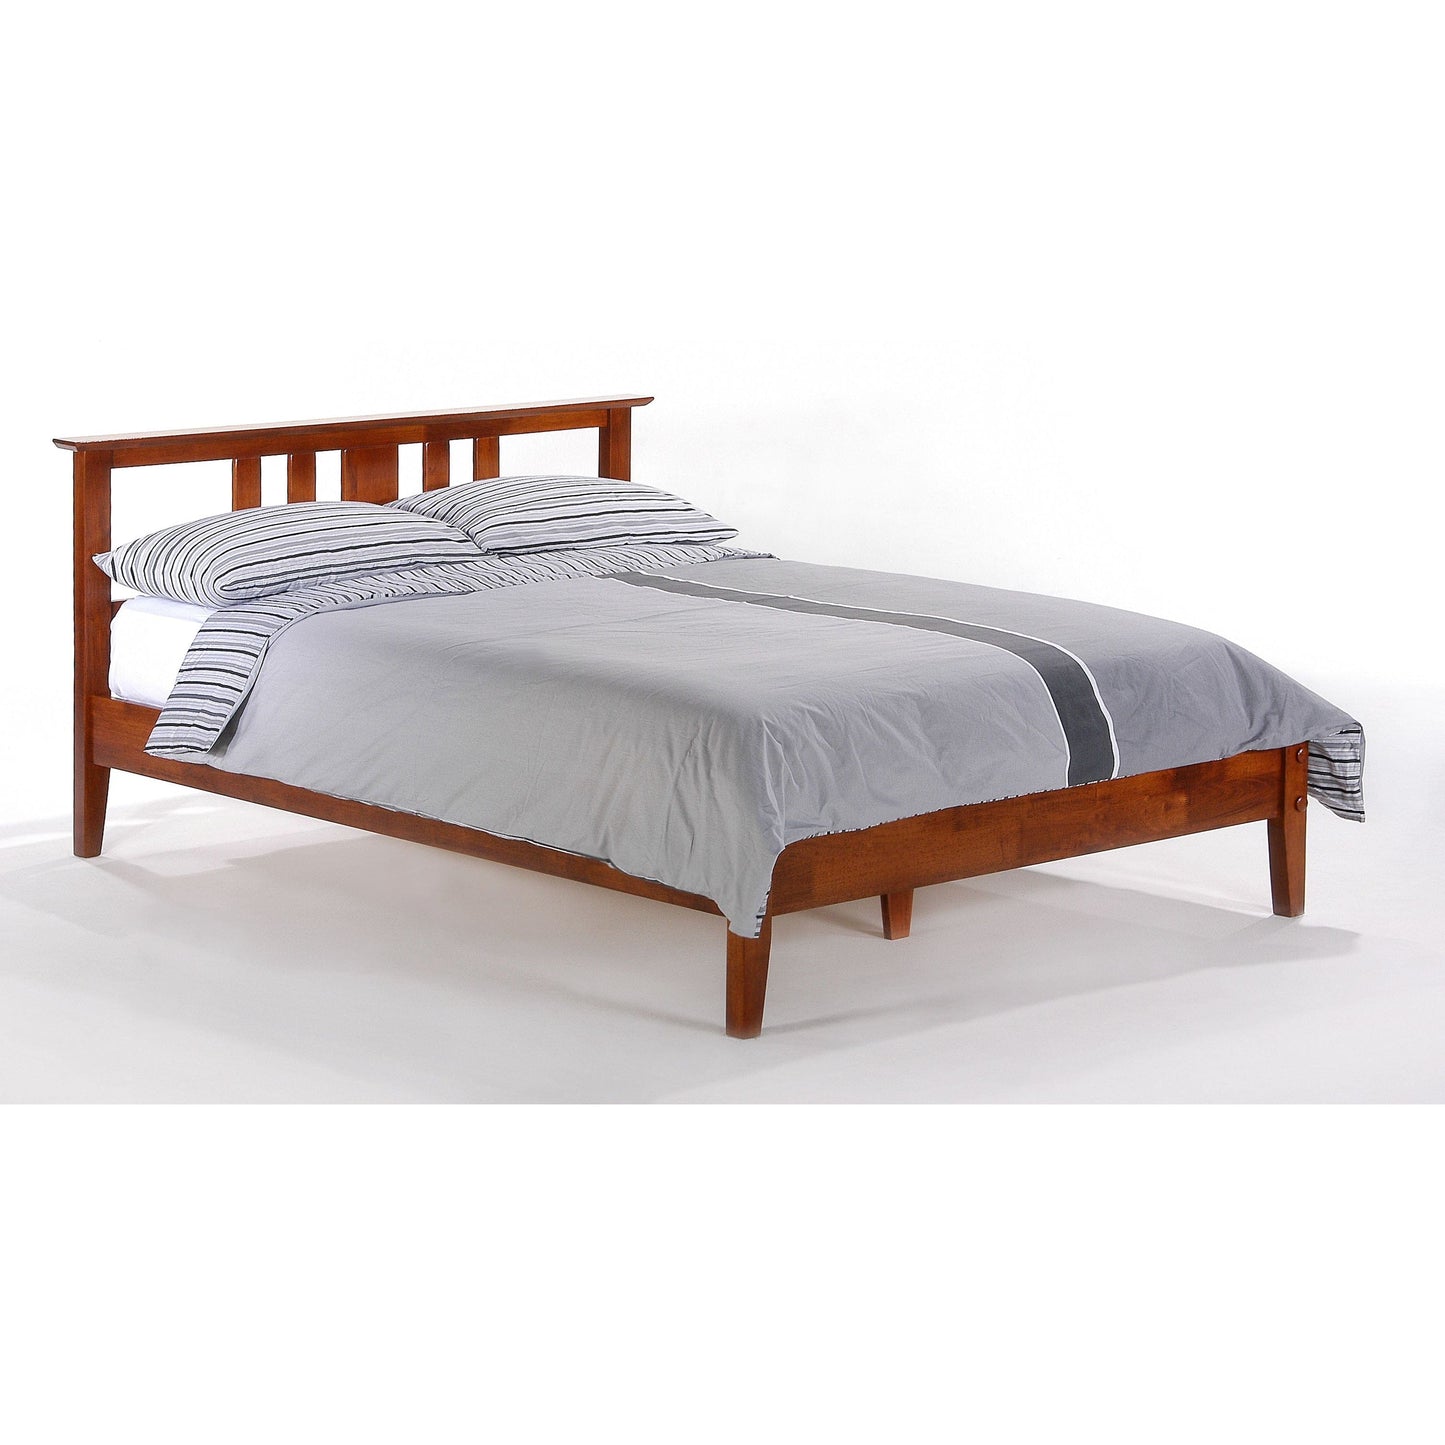 Night And Day Full Thyme Bed in cherry finish (P Series) THY-PH-FUL-CH-COM